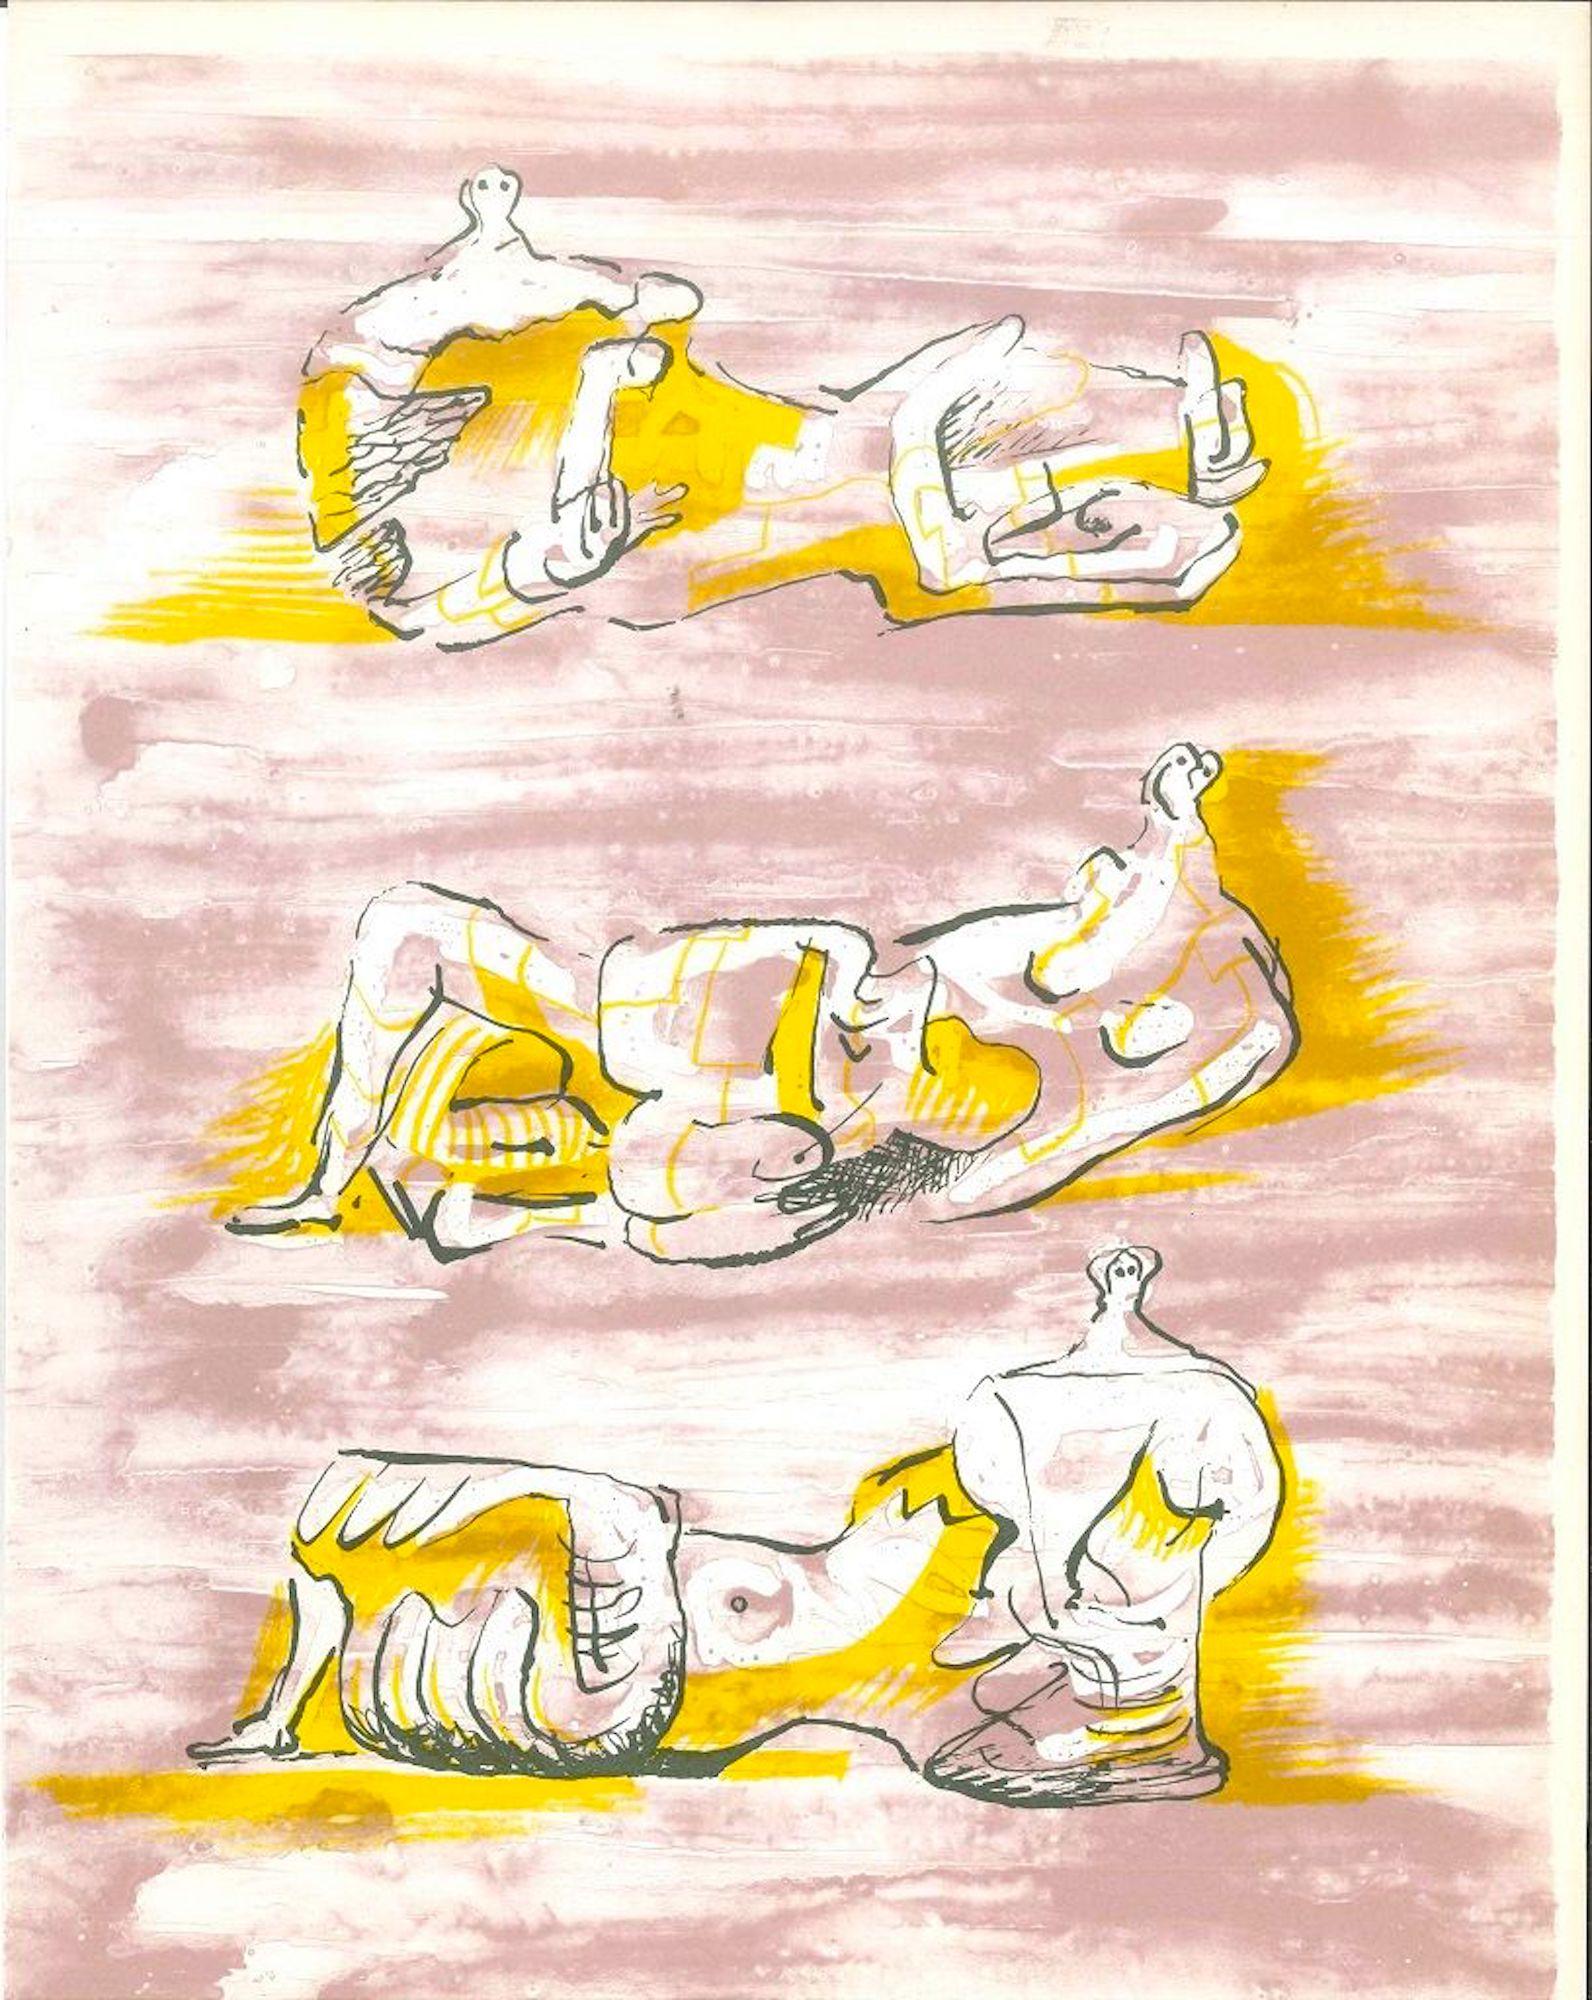 Figures allongées is an original print by the British artist  Henry Moore (Castleford 1898 - Much Hadham 1986).

This color lithograph on paper, was edited by the French magazine "XXe Siécle", and published on the Panorama 71- , number issue XXXIV,